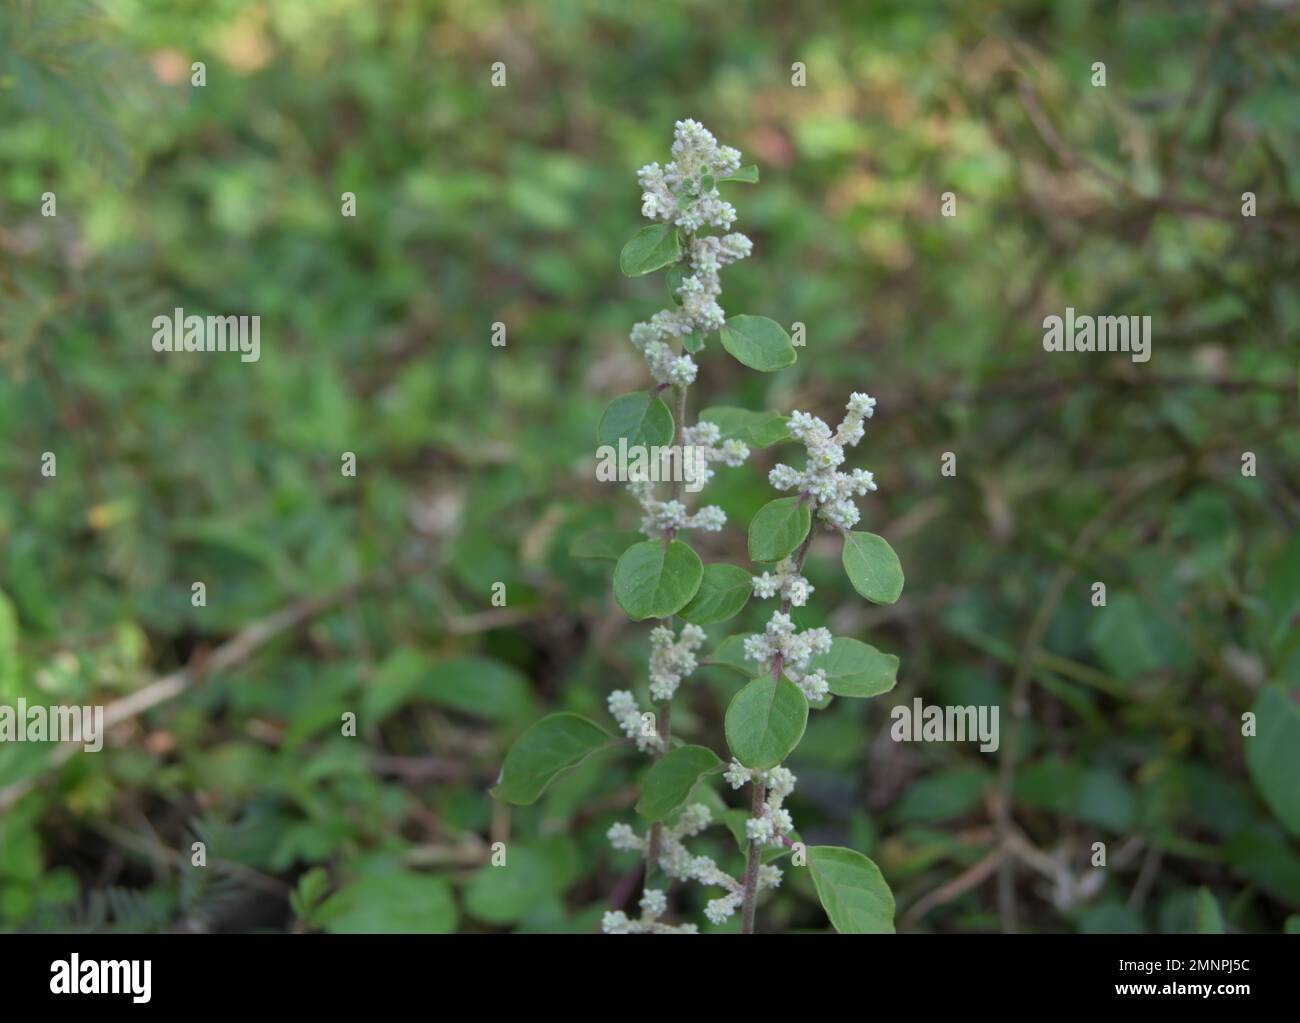 A mountain knot grass plant (Aerva Lanata) with blooms tiny white flower clusters in leaf axils Stock Photo